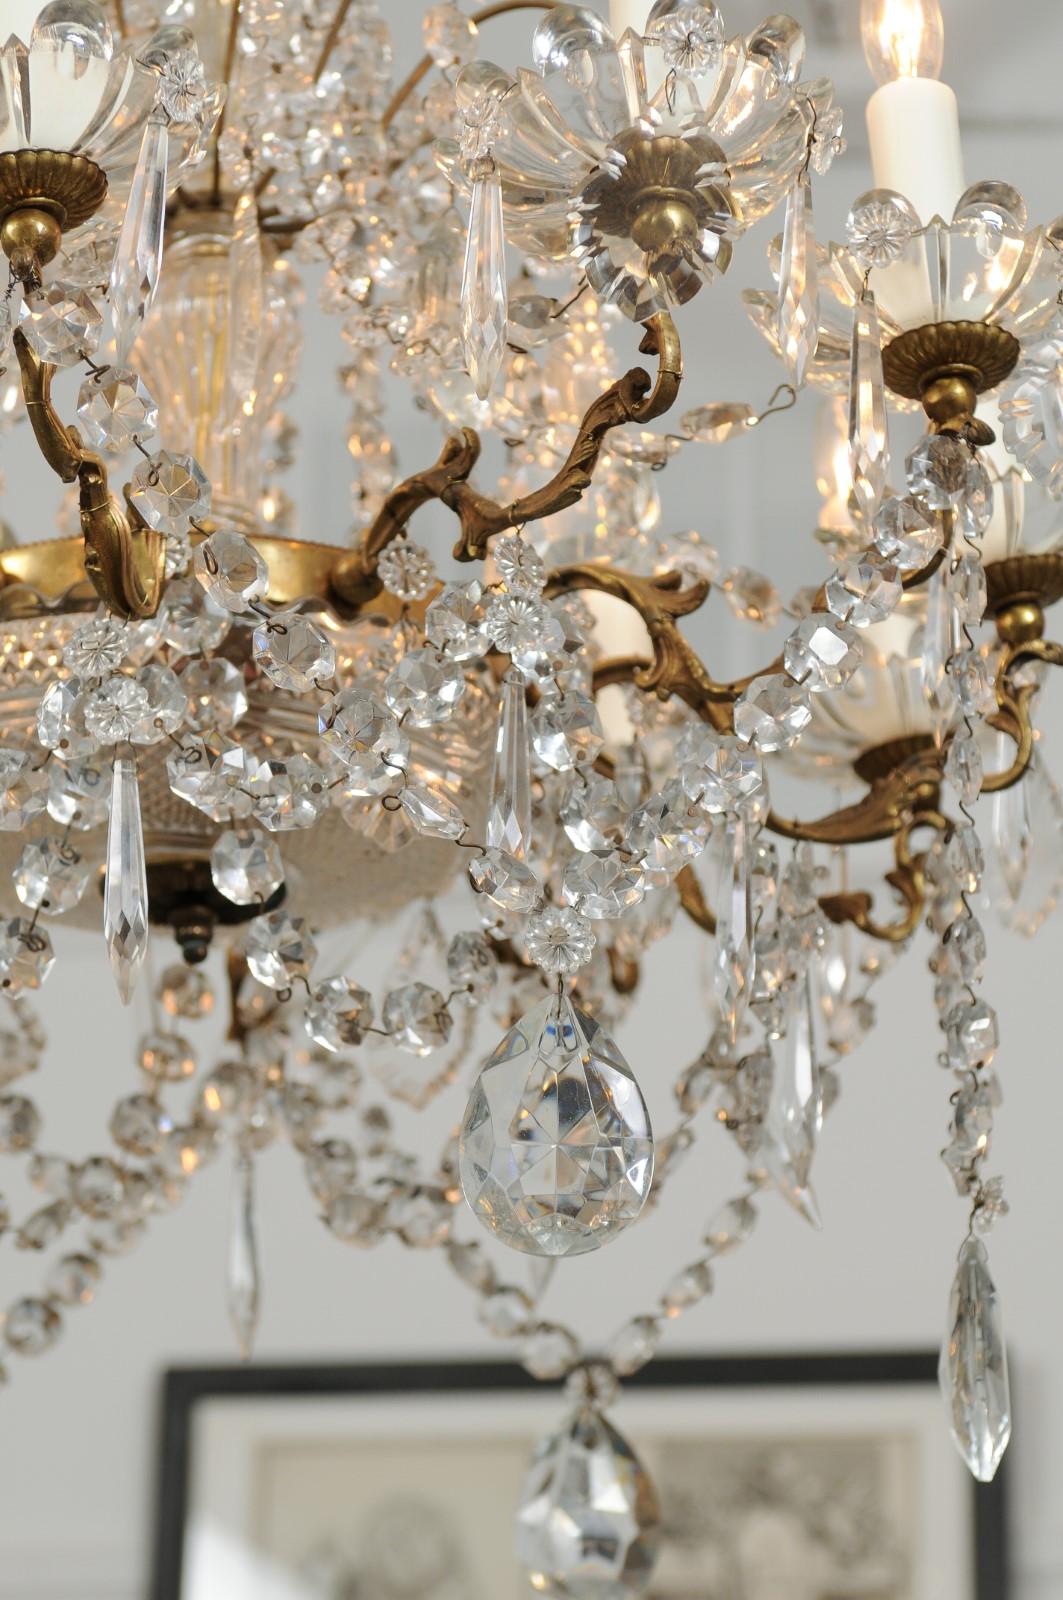 20th Century French 1920s Brass and Crystal Twelve-Light Chandelier with Scrolled Arms